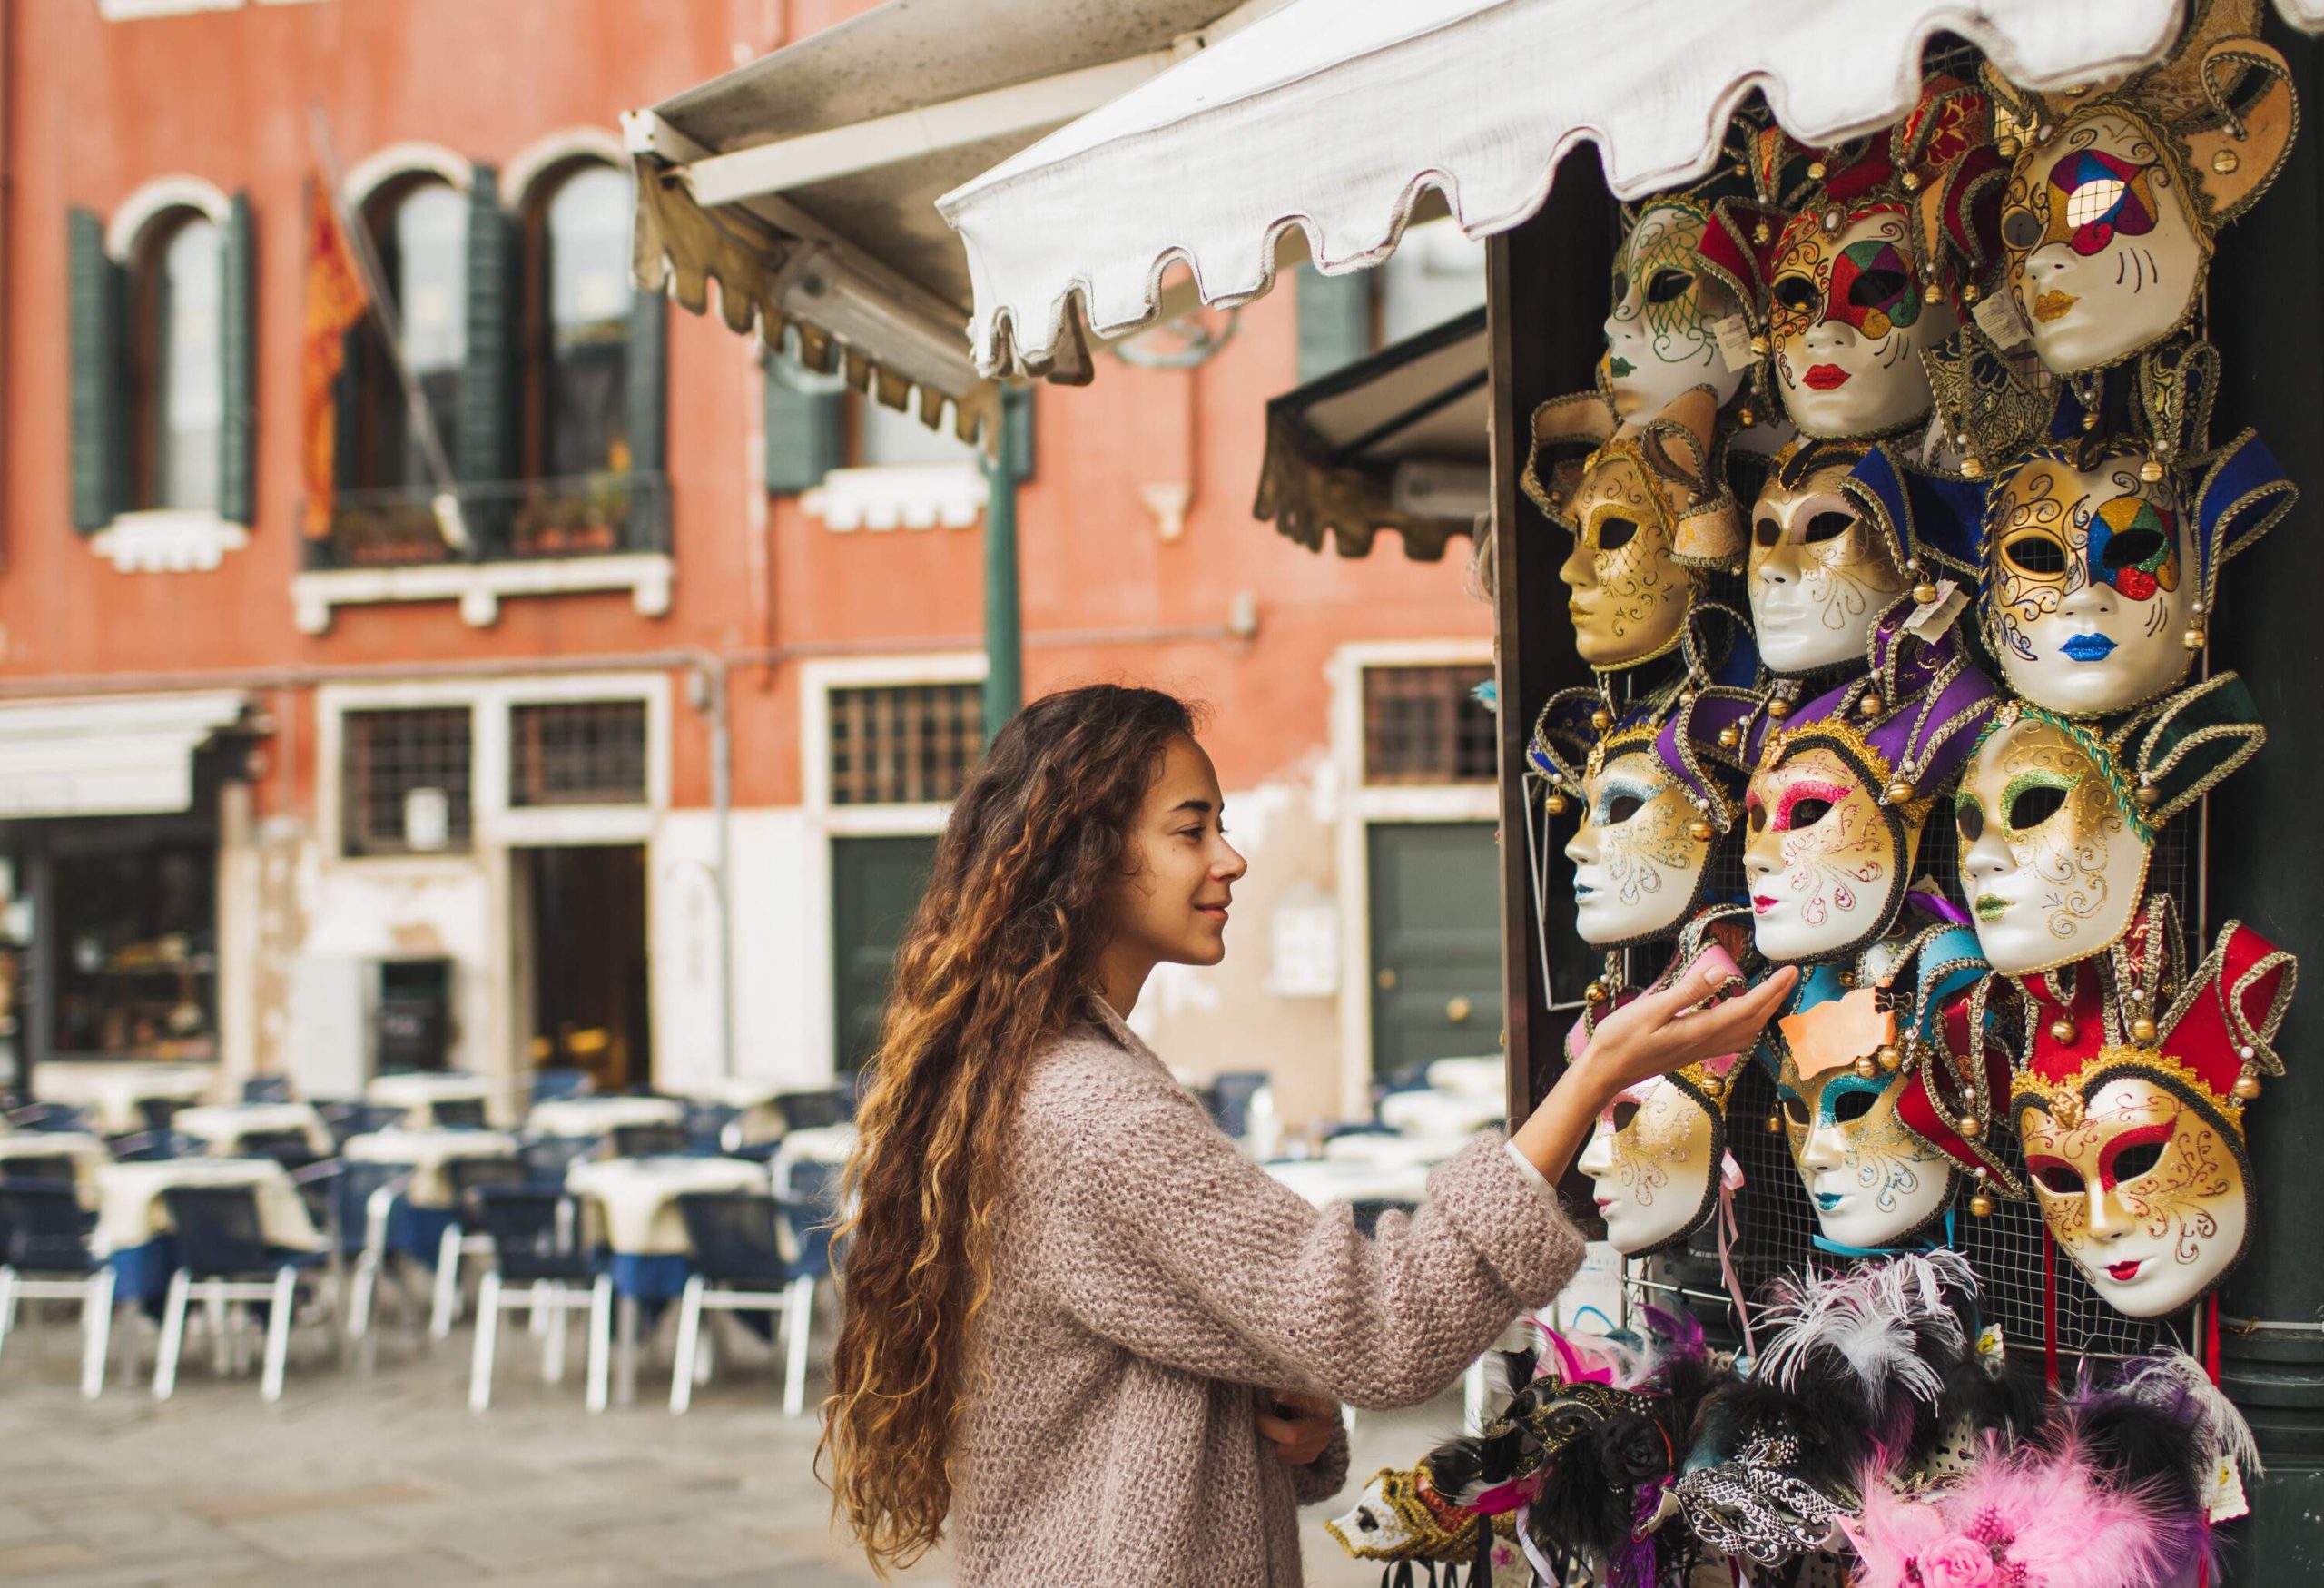 A long-curly-haired lady looks at a mask displayed outside a souvenir shop.